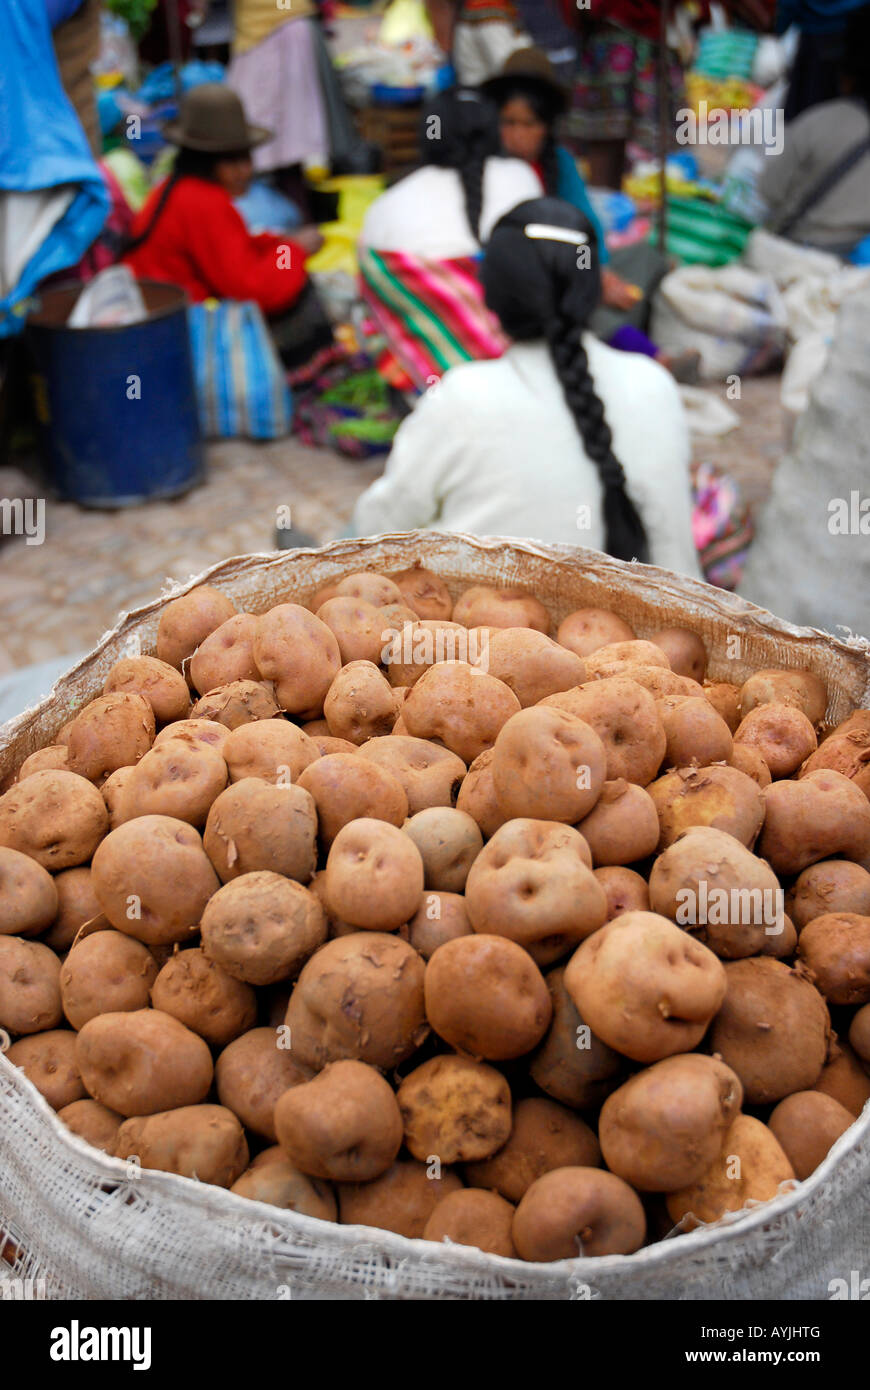 Potatoes on sale at the weekly market in the Andean village of Pisac, Peru. Stock Photo